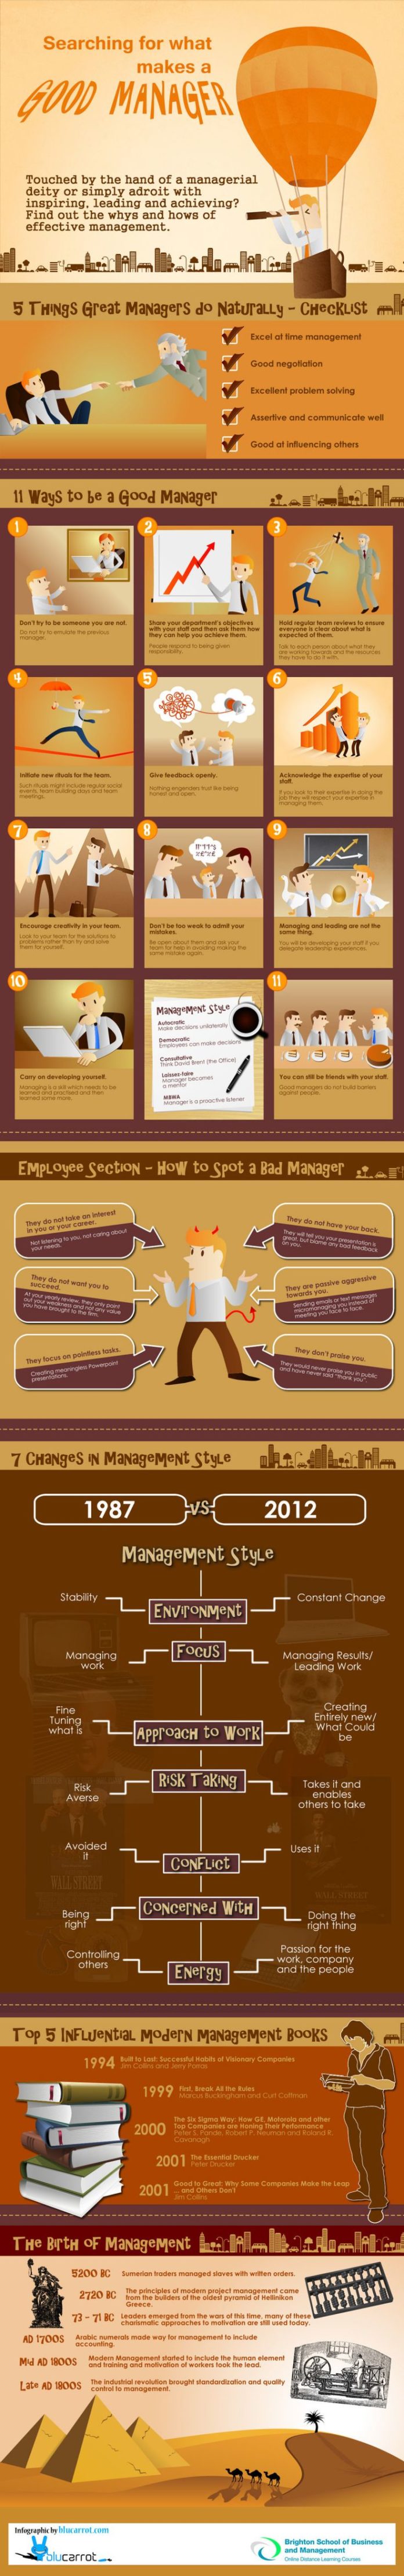 Management : Searching for what makes a good manager [infographic ...